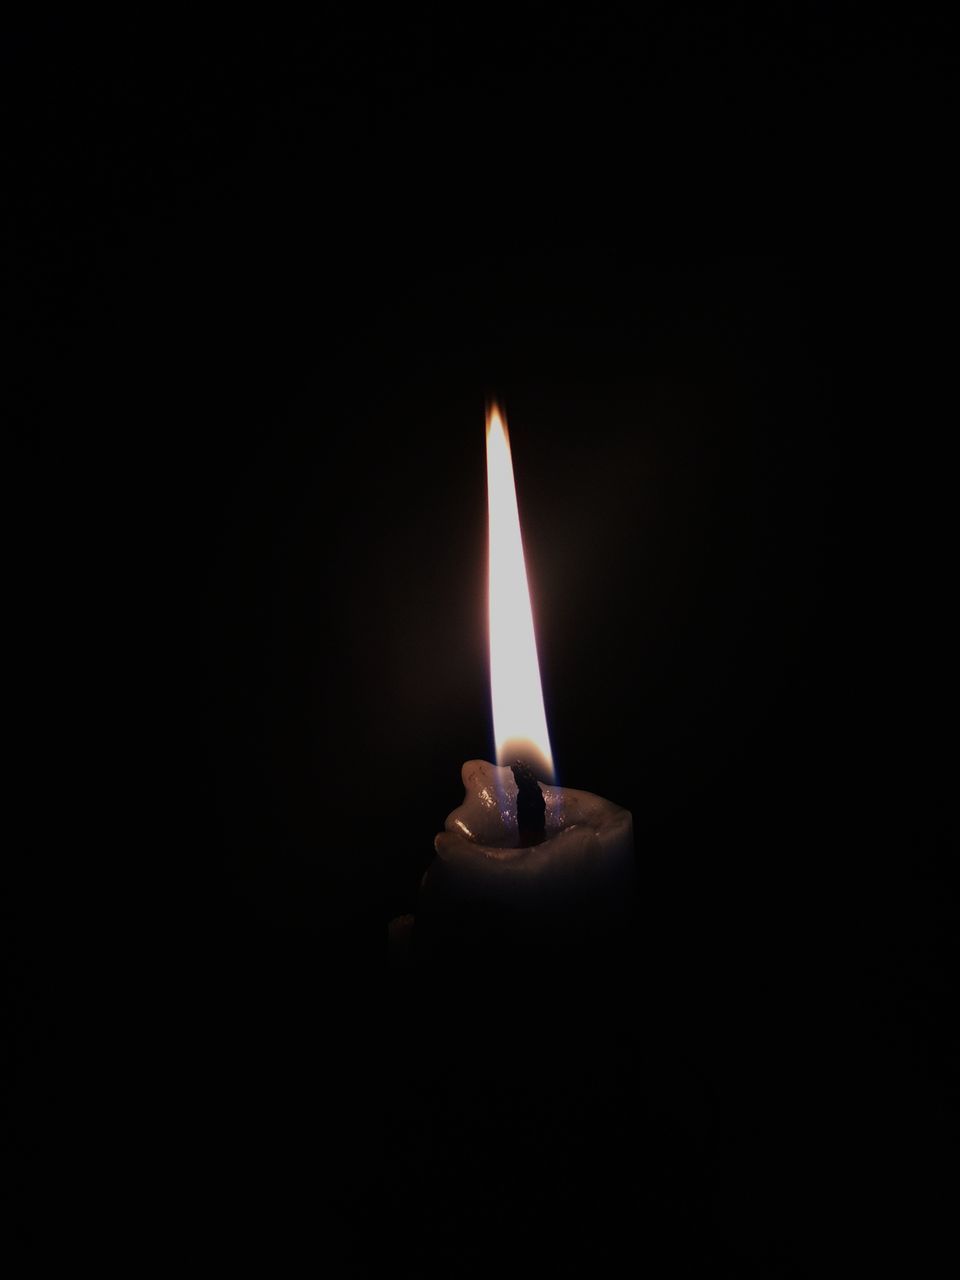 CLOSE-UP OF LIT CANDLE IN DARK